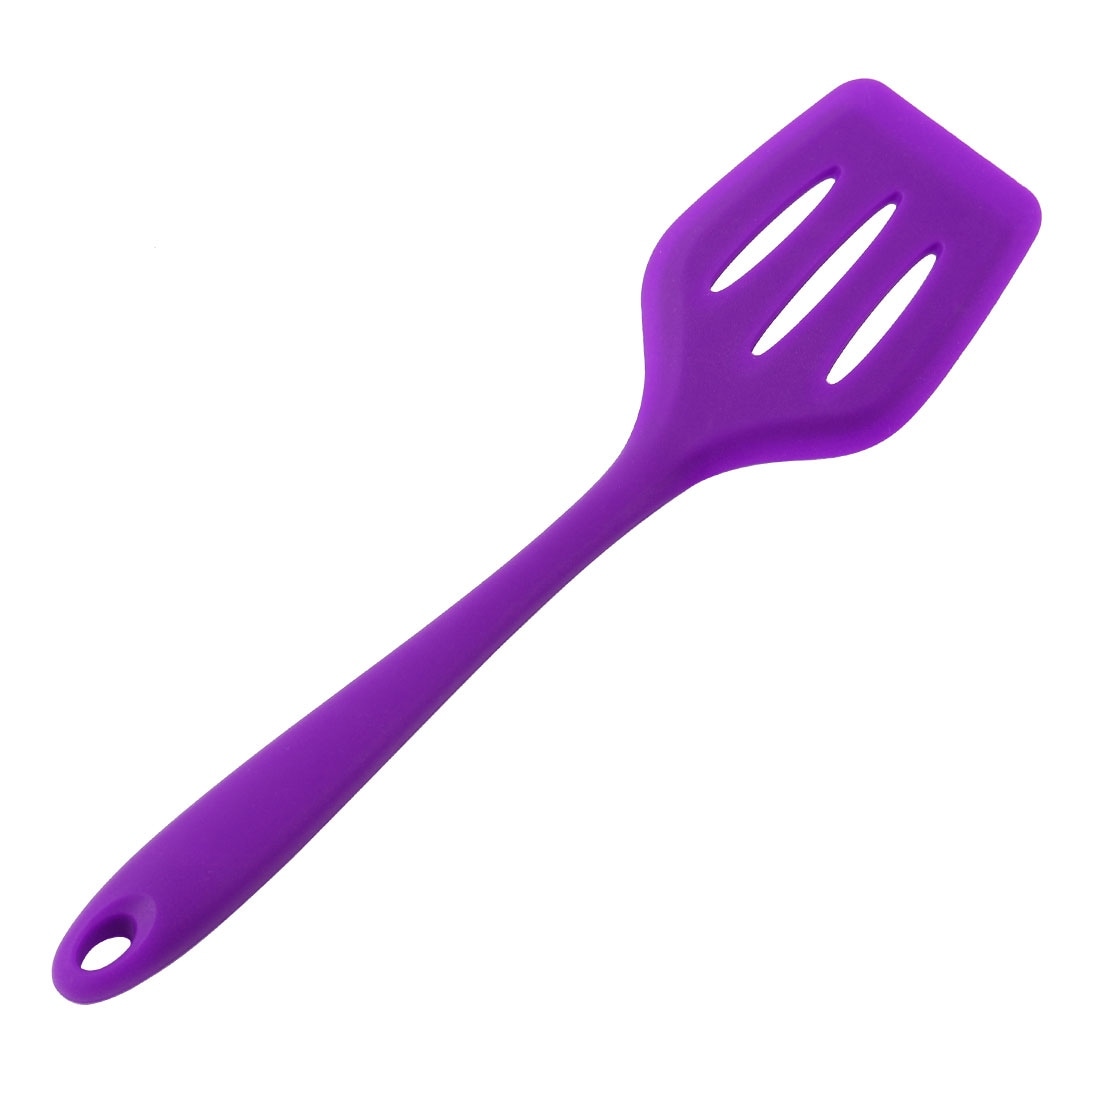 https://ak1.ostkcdn.com/images/products/is/images/direct/a91326925f154056a1647eeeead8d549da46152a/Silicone-Slotted-Turner-Spatula-Heat-Resistant-Non-scratch-Kitchen-Non-Stick-Spatula-for-Cooking-Baking-and-Mixing-Purple.jpg